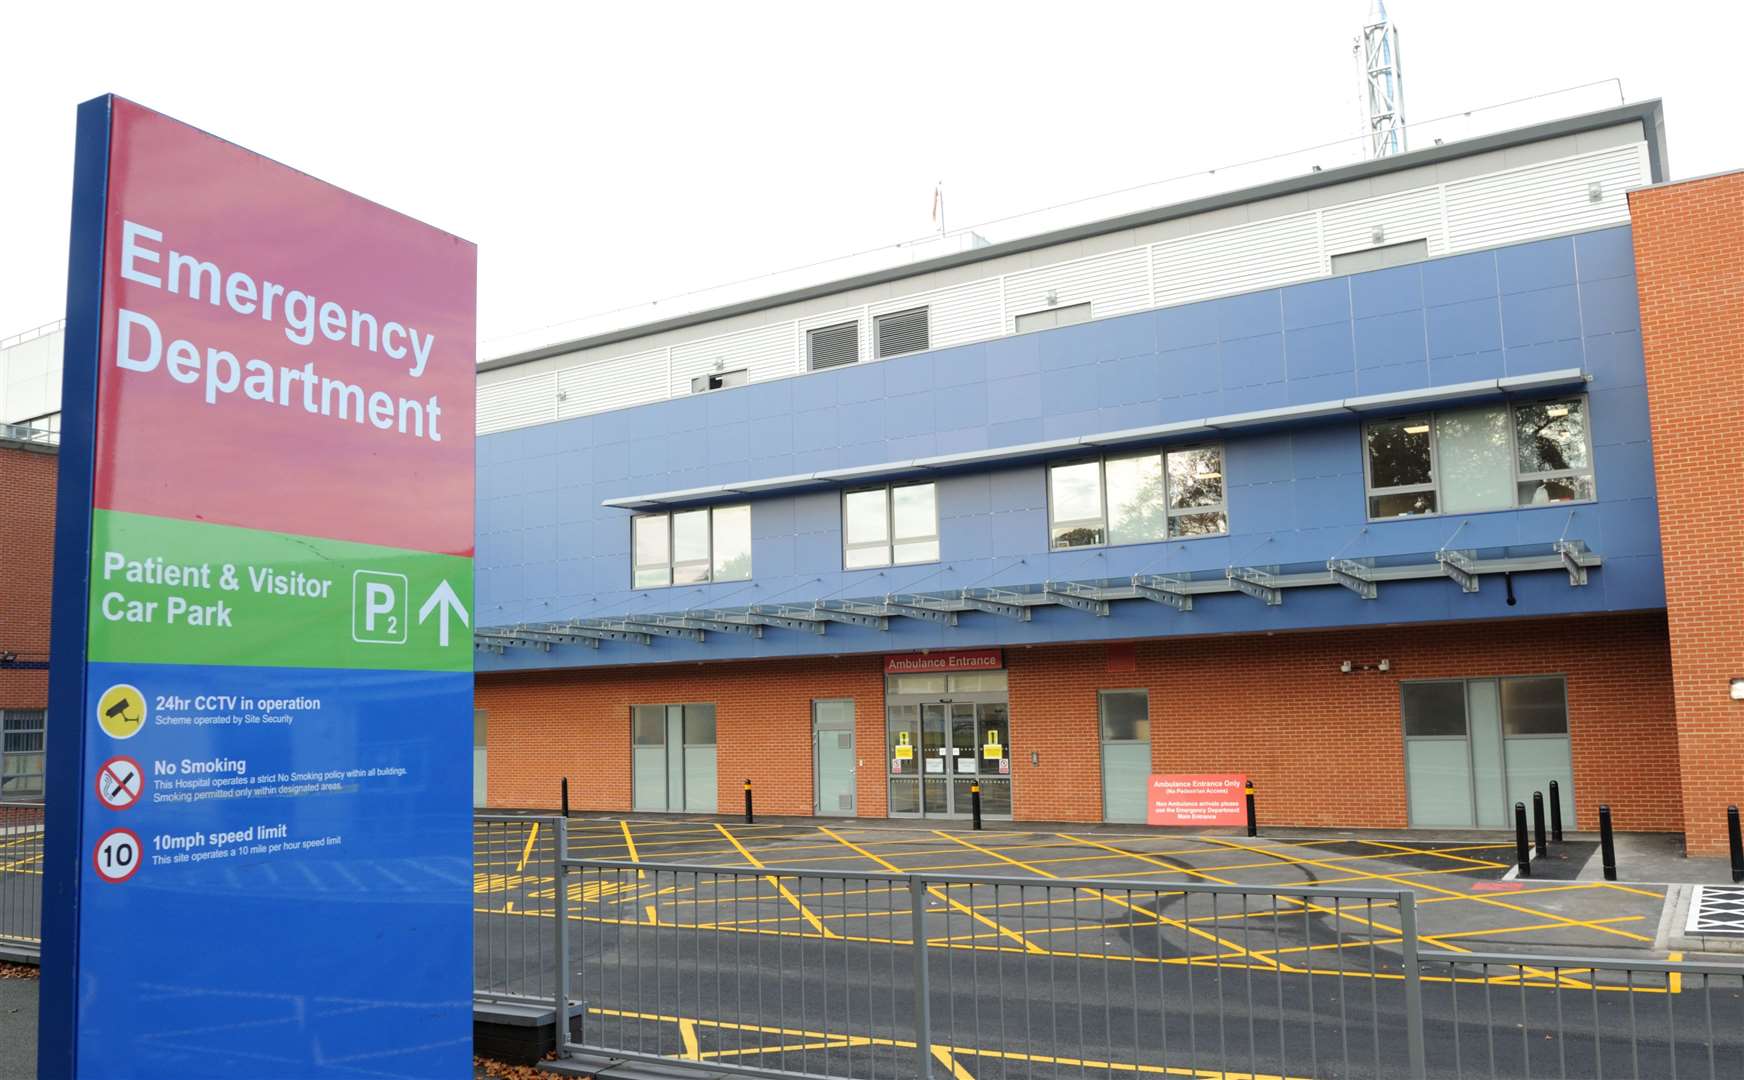 More than 10,000 people waited four hours or longer in Kent A&E departments last month